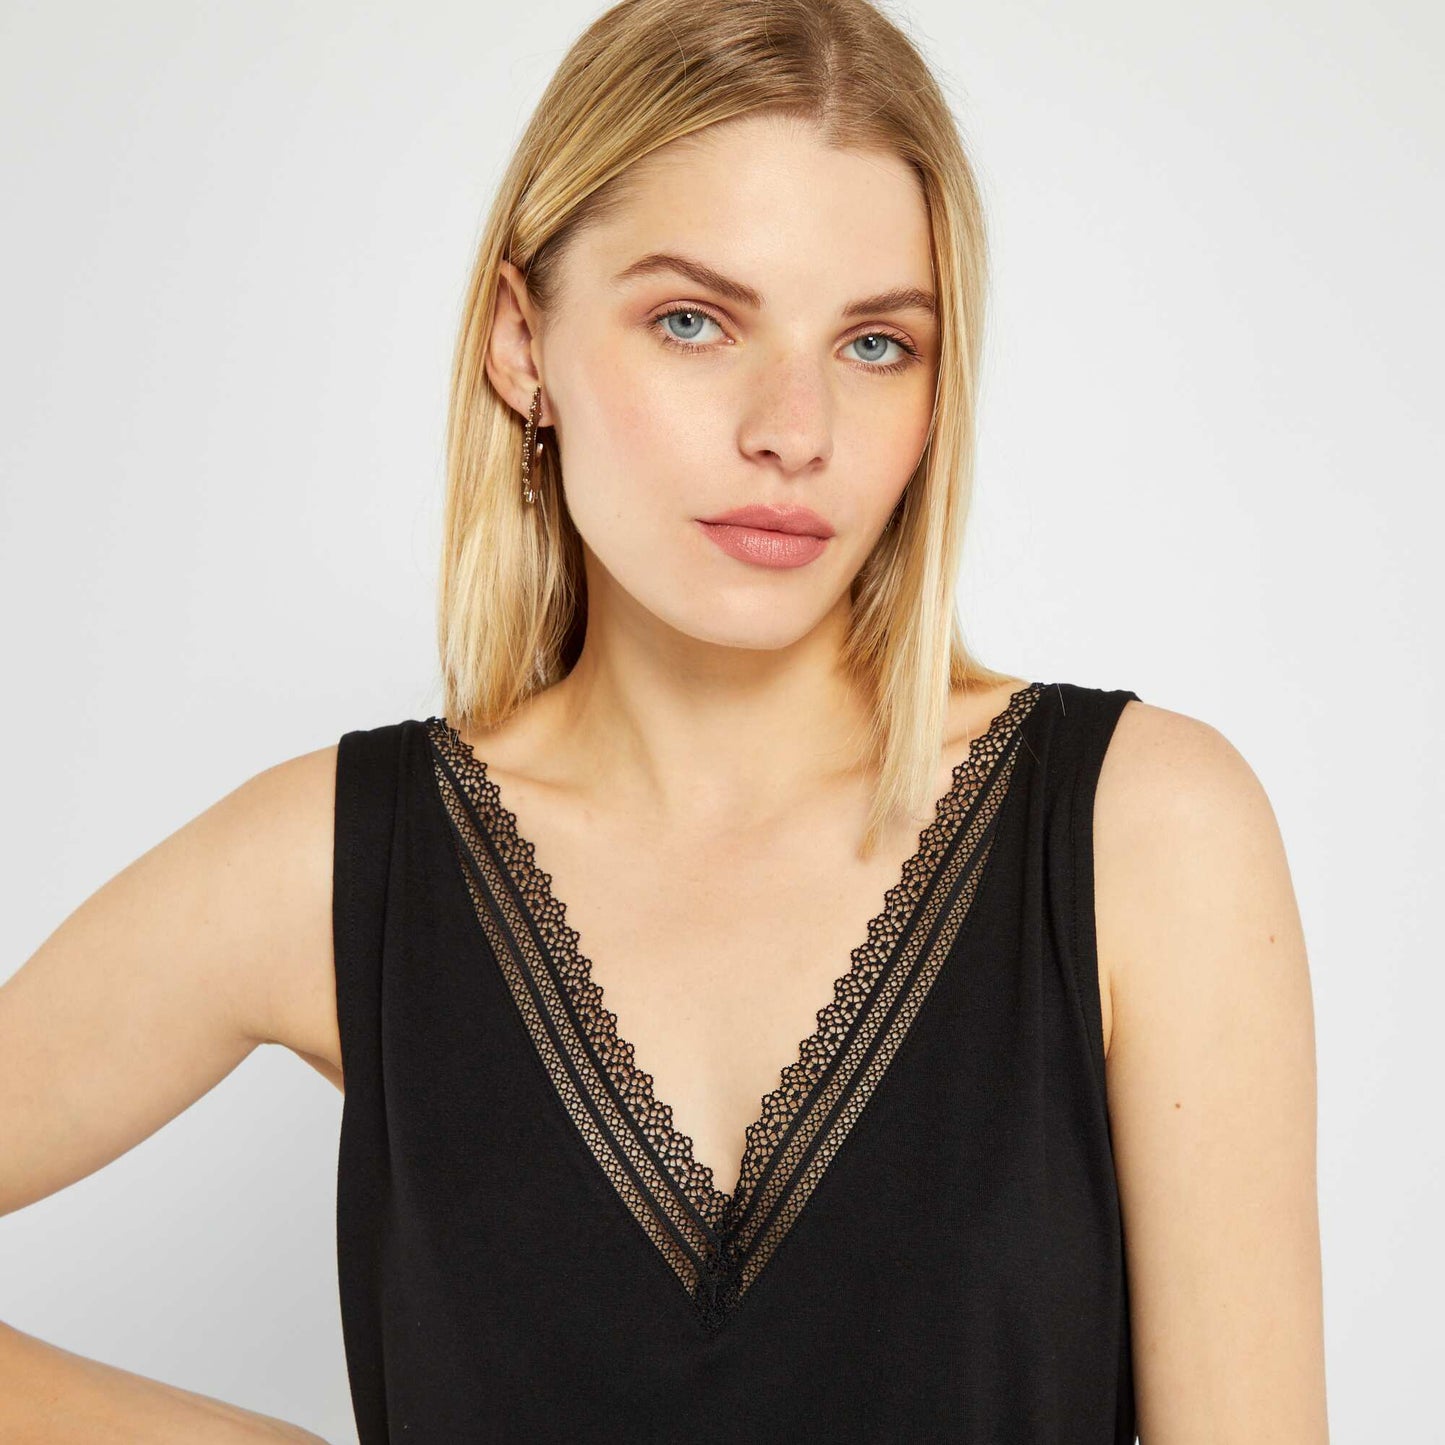 Stretch vest top with lace Black